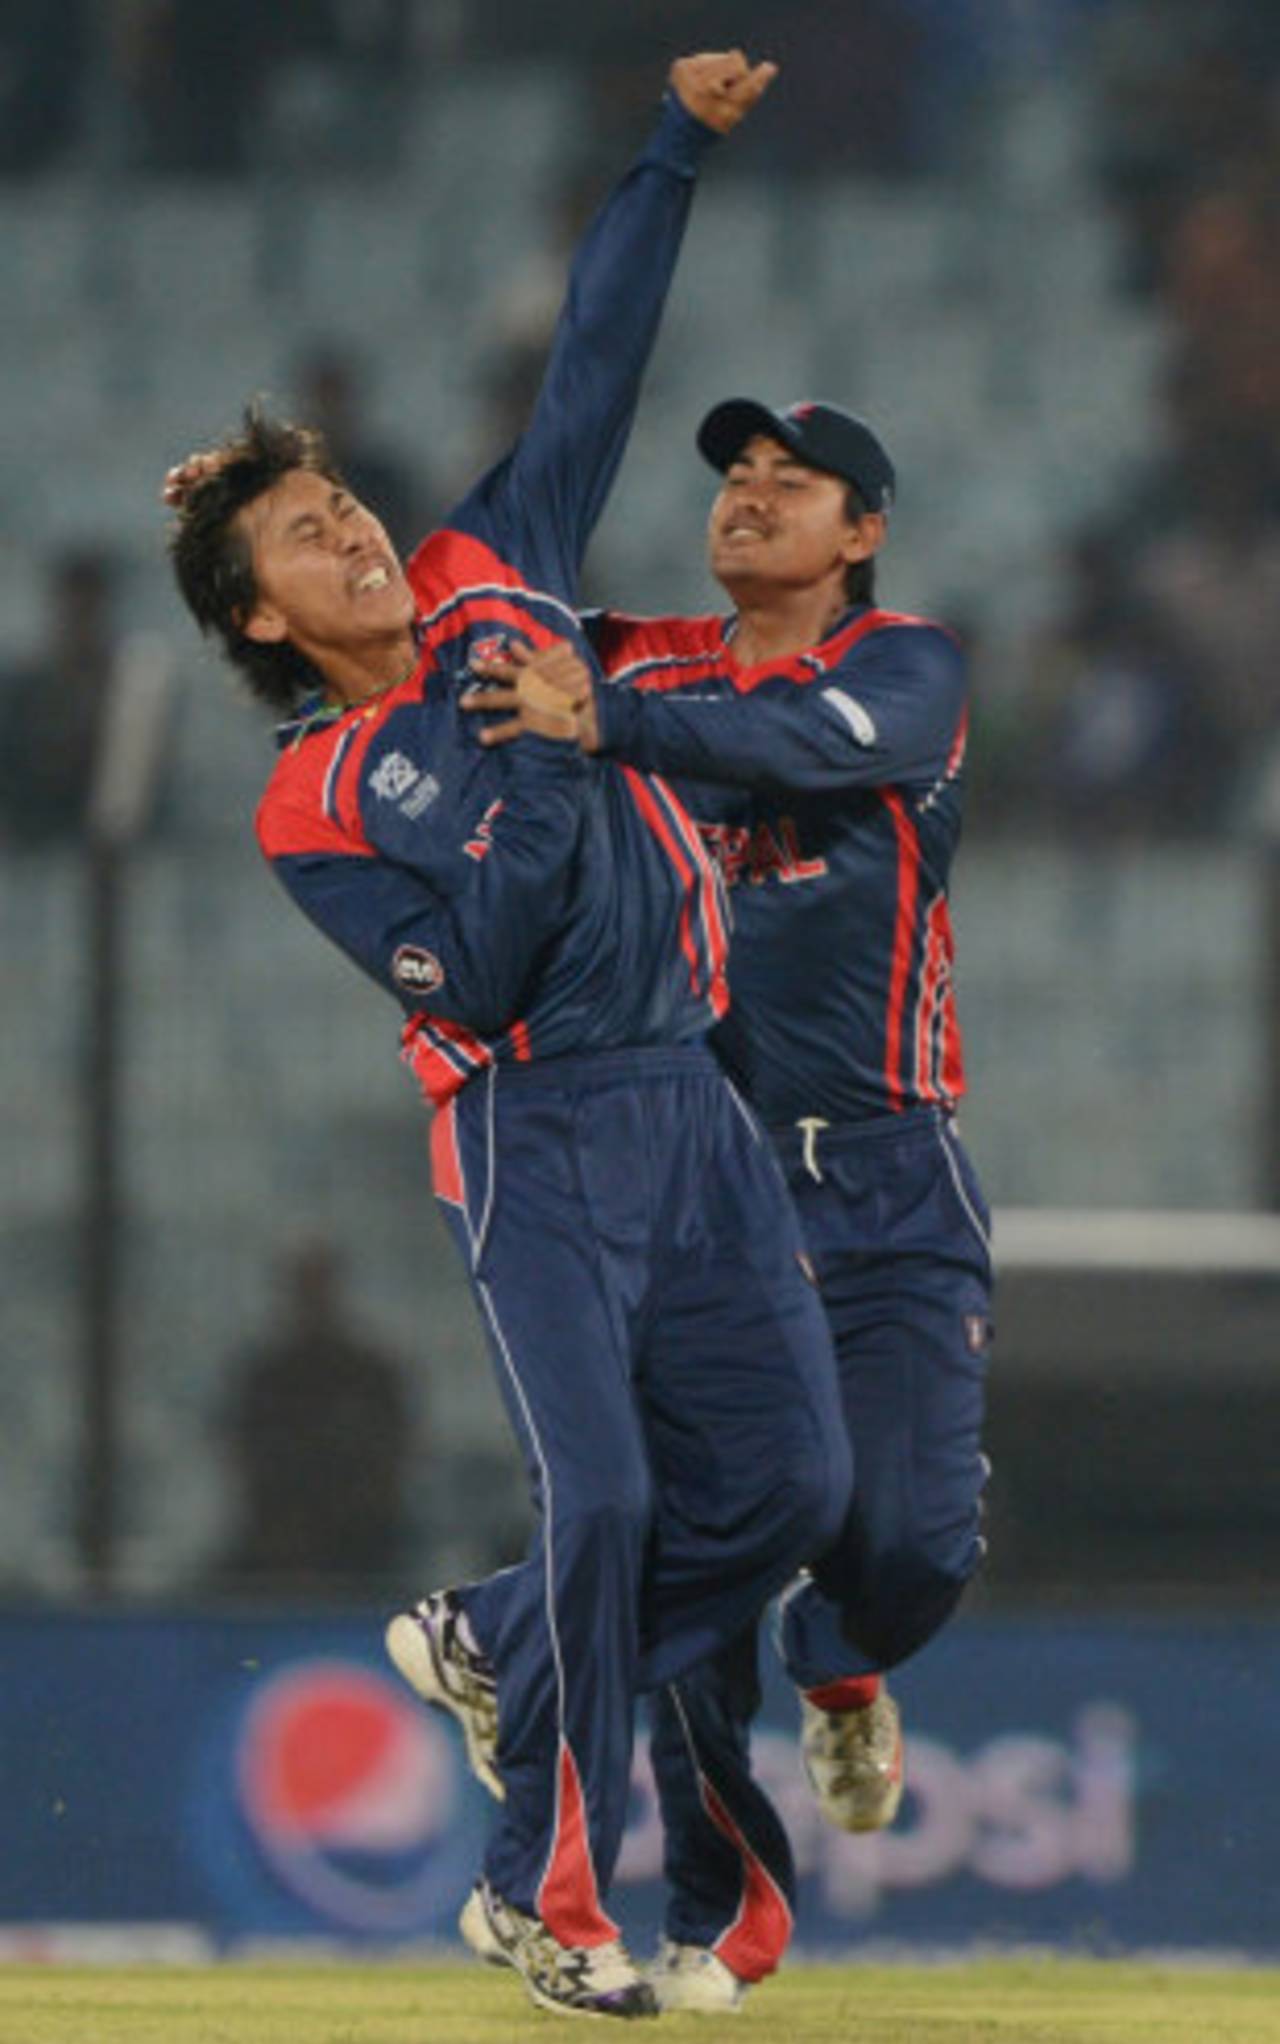 Nepal showed their pedigree when healthy by going 2-1 in the opening round of the 2014 World T20, including a win over Afghanistan&nbsp;&nbsp;&bull;&nbsp;&nbsp;AFP